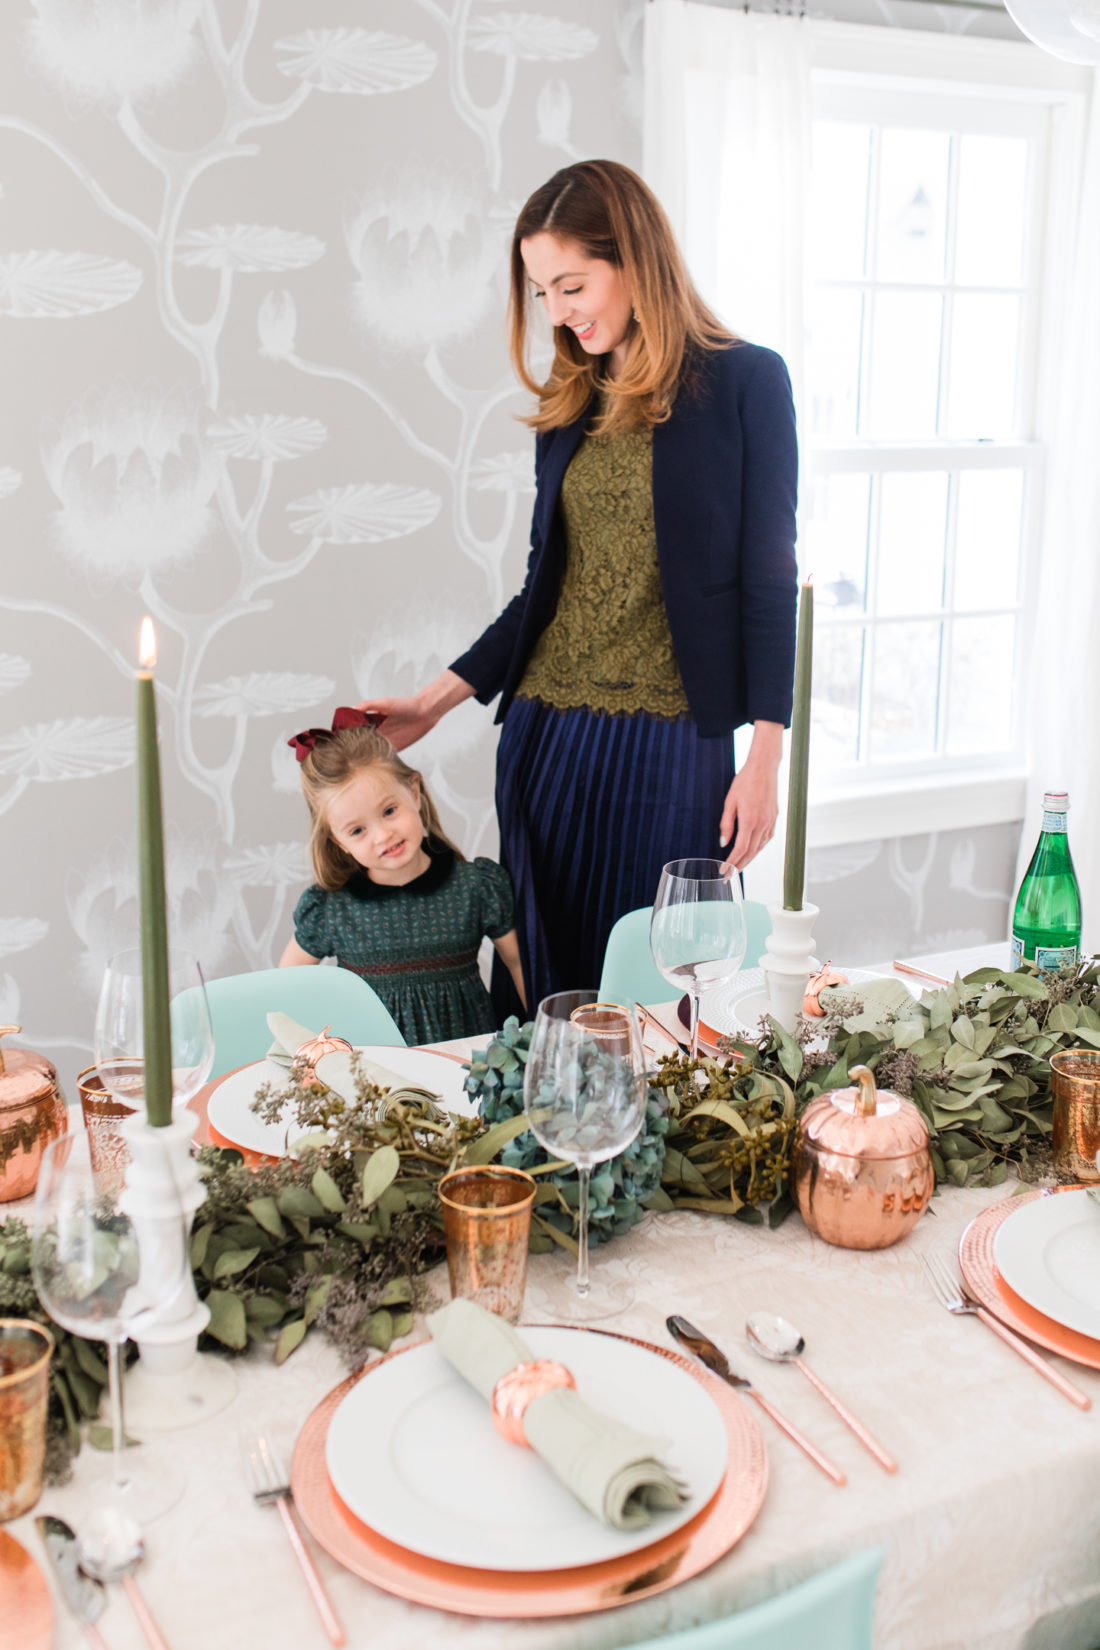 Marlowe Martino helps her Mom set the Thanksgiving table wearing a green velvet smocked party dress